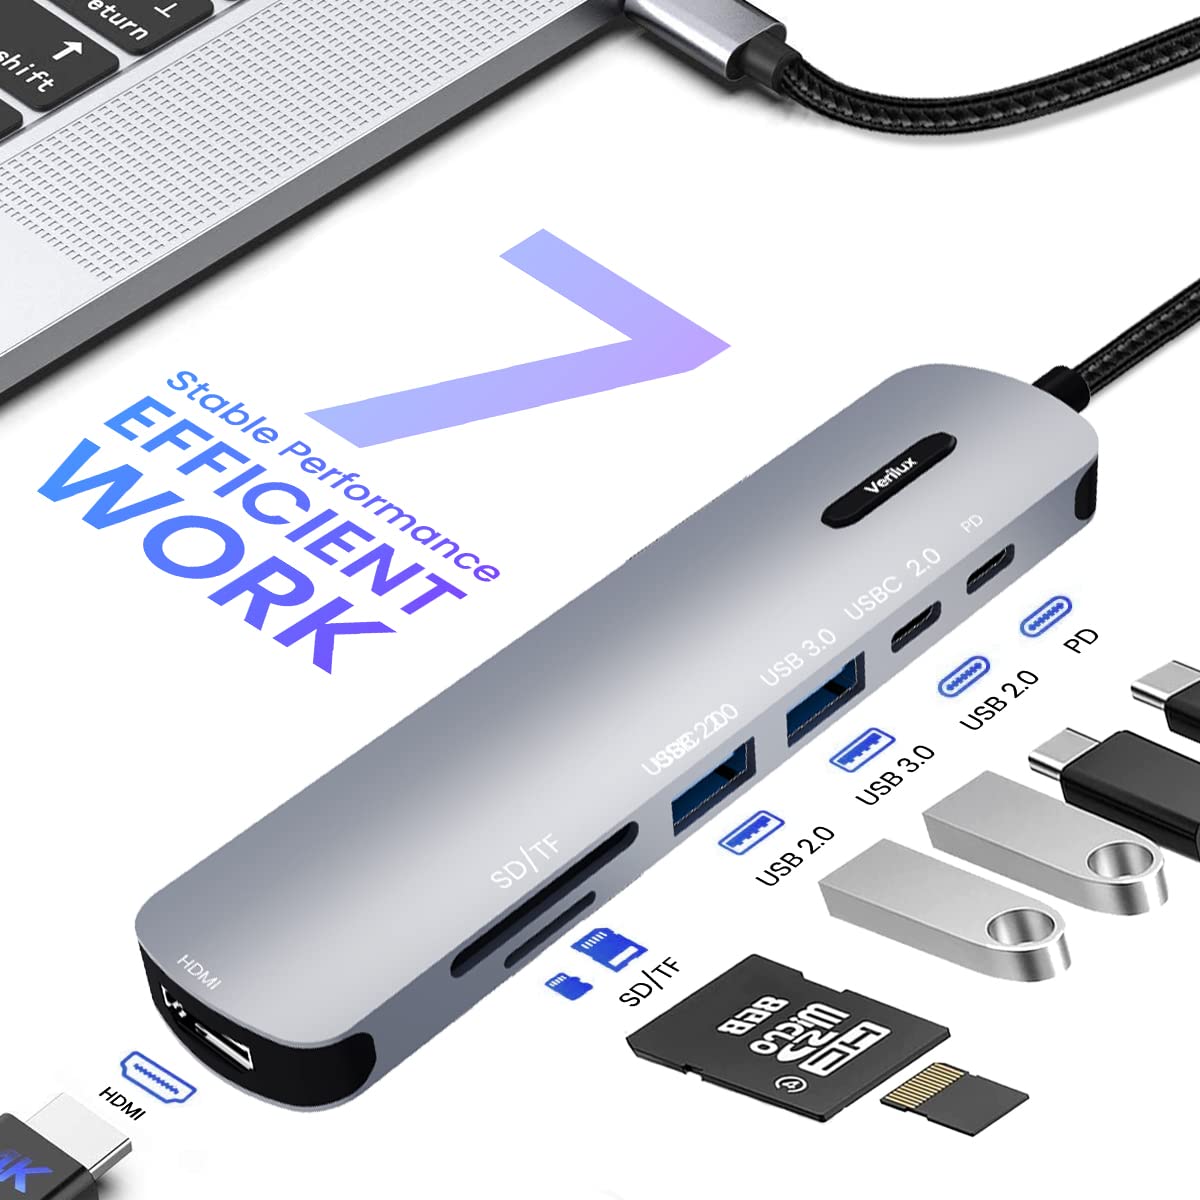 Verilux? USB C HUB 7 in 1 USB C to HDMI Adapter 4K@30Hz, 2.0/3.0 USB Adapter Multiple Port, SD/TF Card Reader, PD 100W & C Data Port USB Type C Hub for Laptop, MacBook Pro Air 20CM USB Hub Long Cable